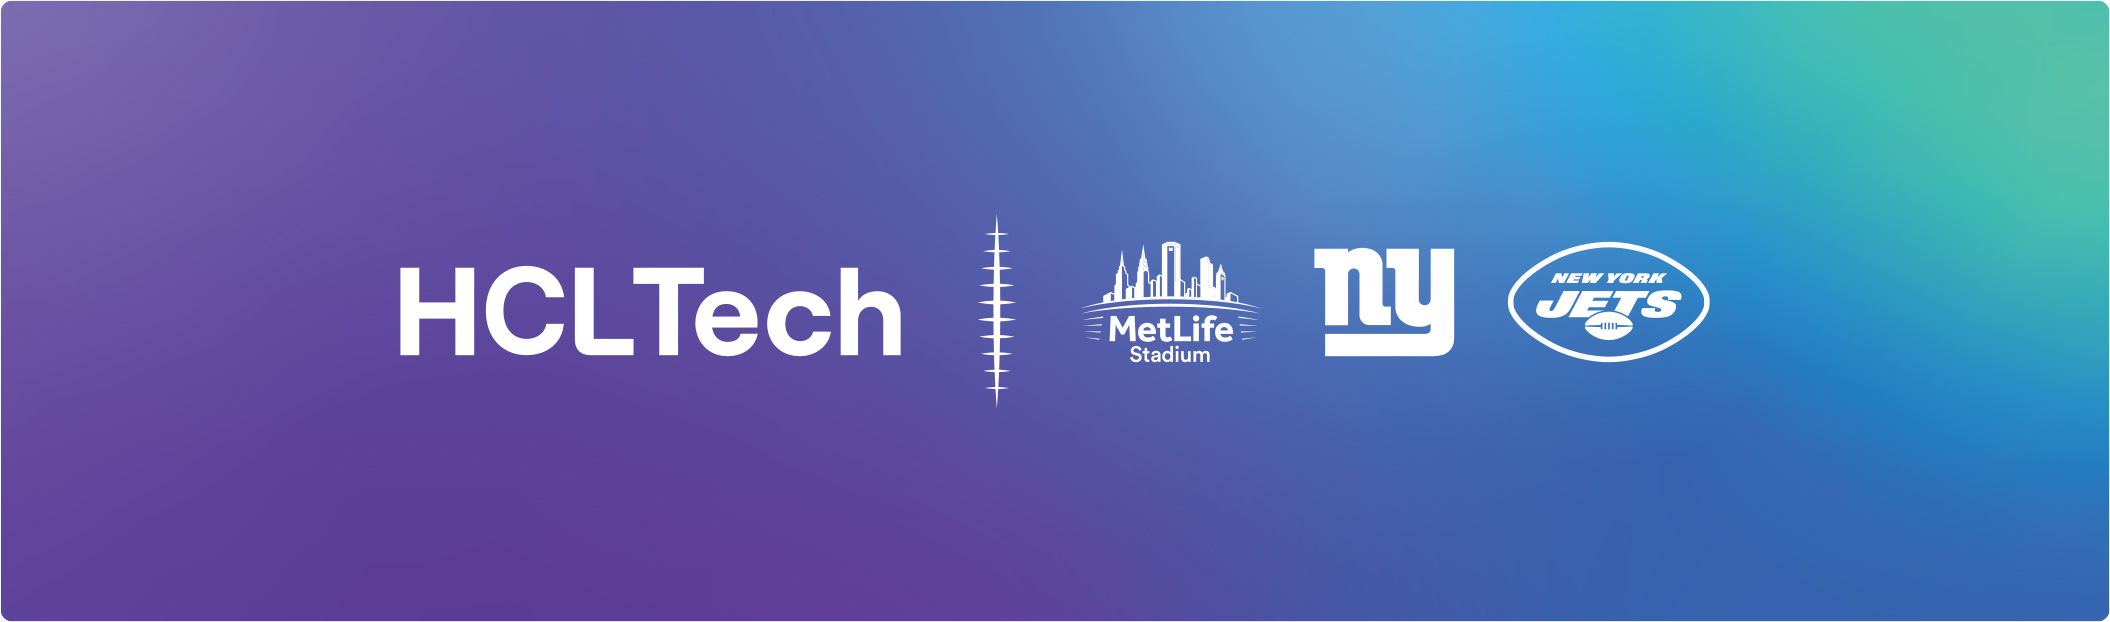 HCLTech is now a Cornerstone partner and the Official Digital Transformation Partner of MetLife Stadium, the largest U.S. East Coast stadium and the two American football teams it hosts-the New York Giants and the New York Jets.